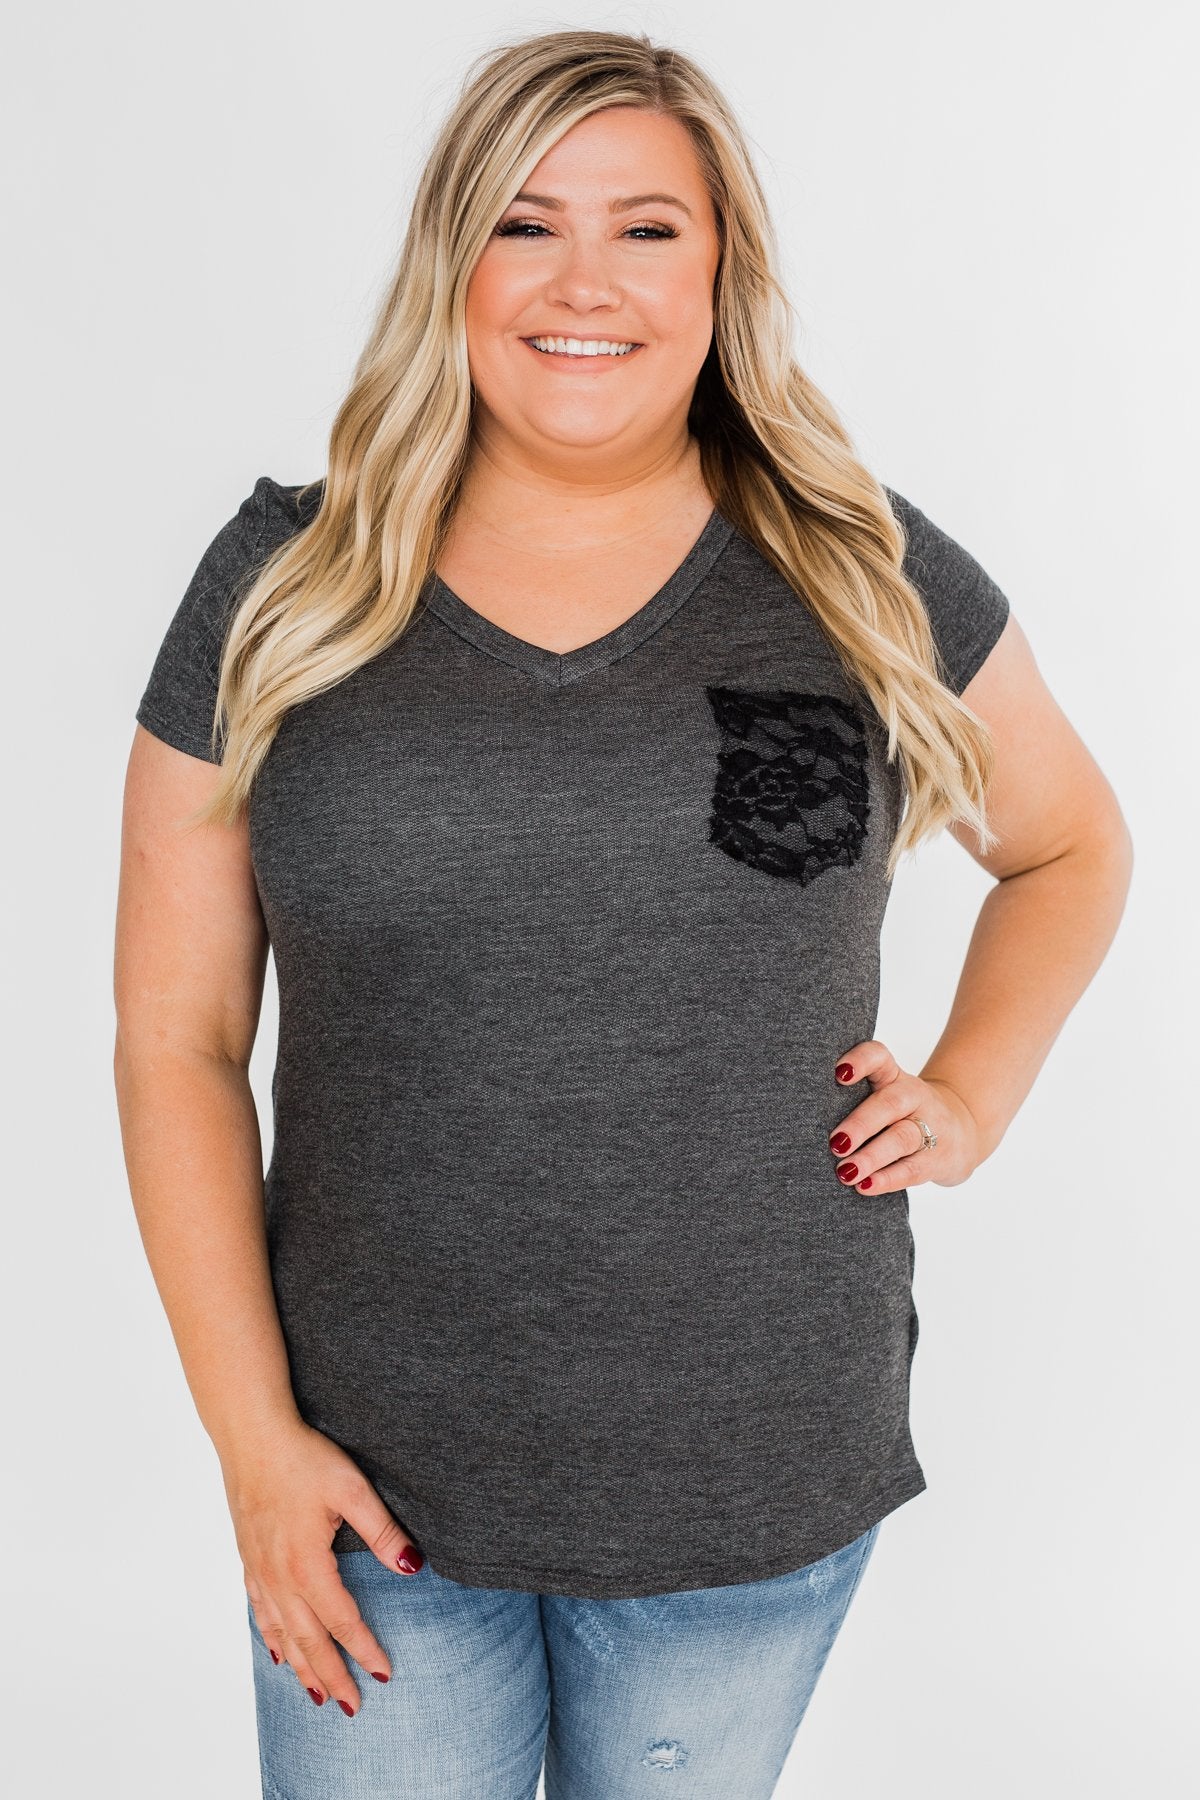 Torn Up in Lace Pocket Top- Black & Charcoal